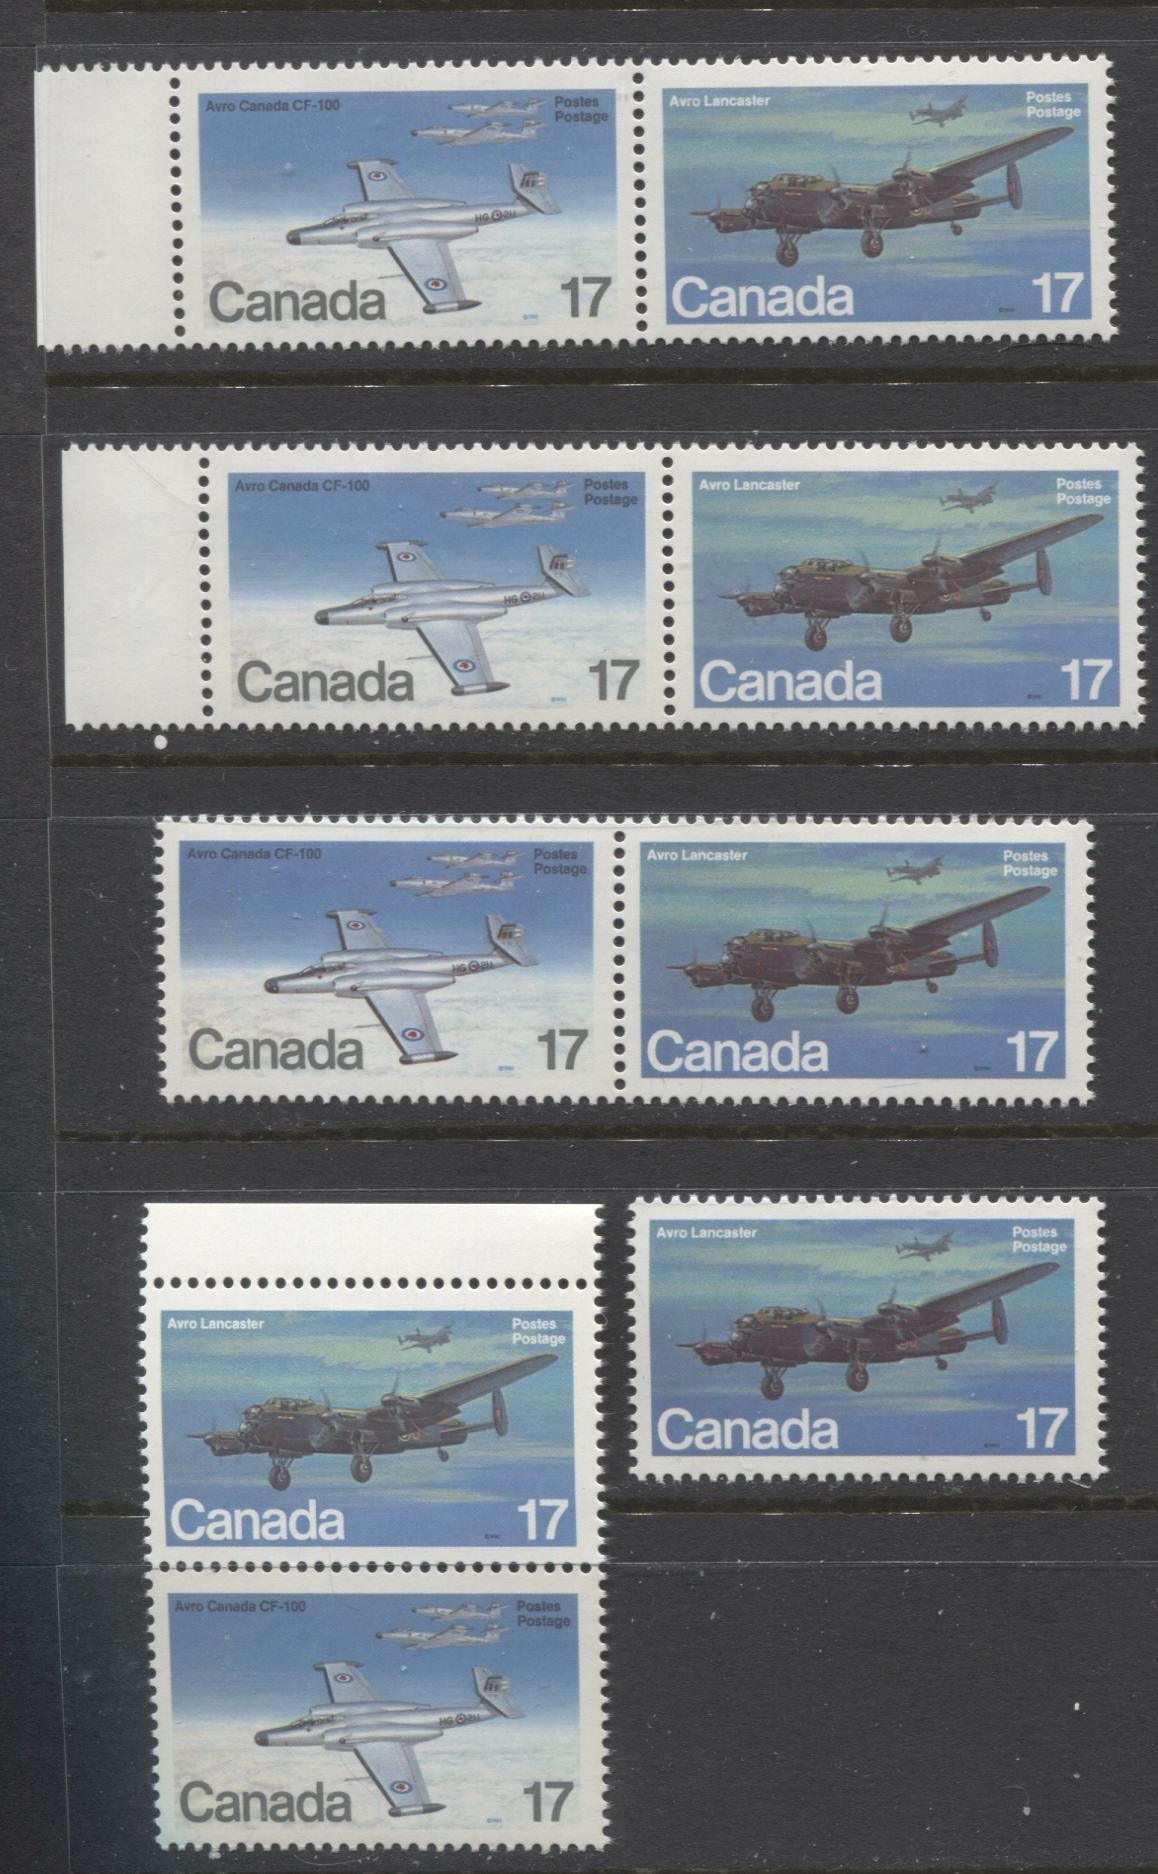 Lot 374 Canada #874a, 874ai 17c Multicoloured, 1980 Military Aircraft Issue, 4 VFNH Horizontal & Vertical Se-Tenant Pairs And 1 Single, All With Different Potentially Constant Varieties That Are Different From Other Lots, DF1/DF2 and LF3/LF3 Papers